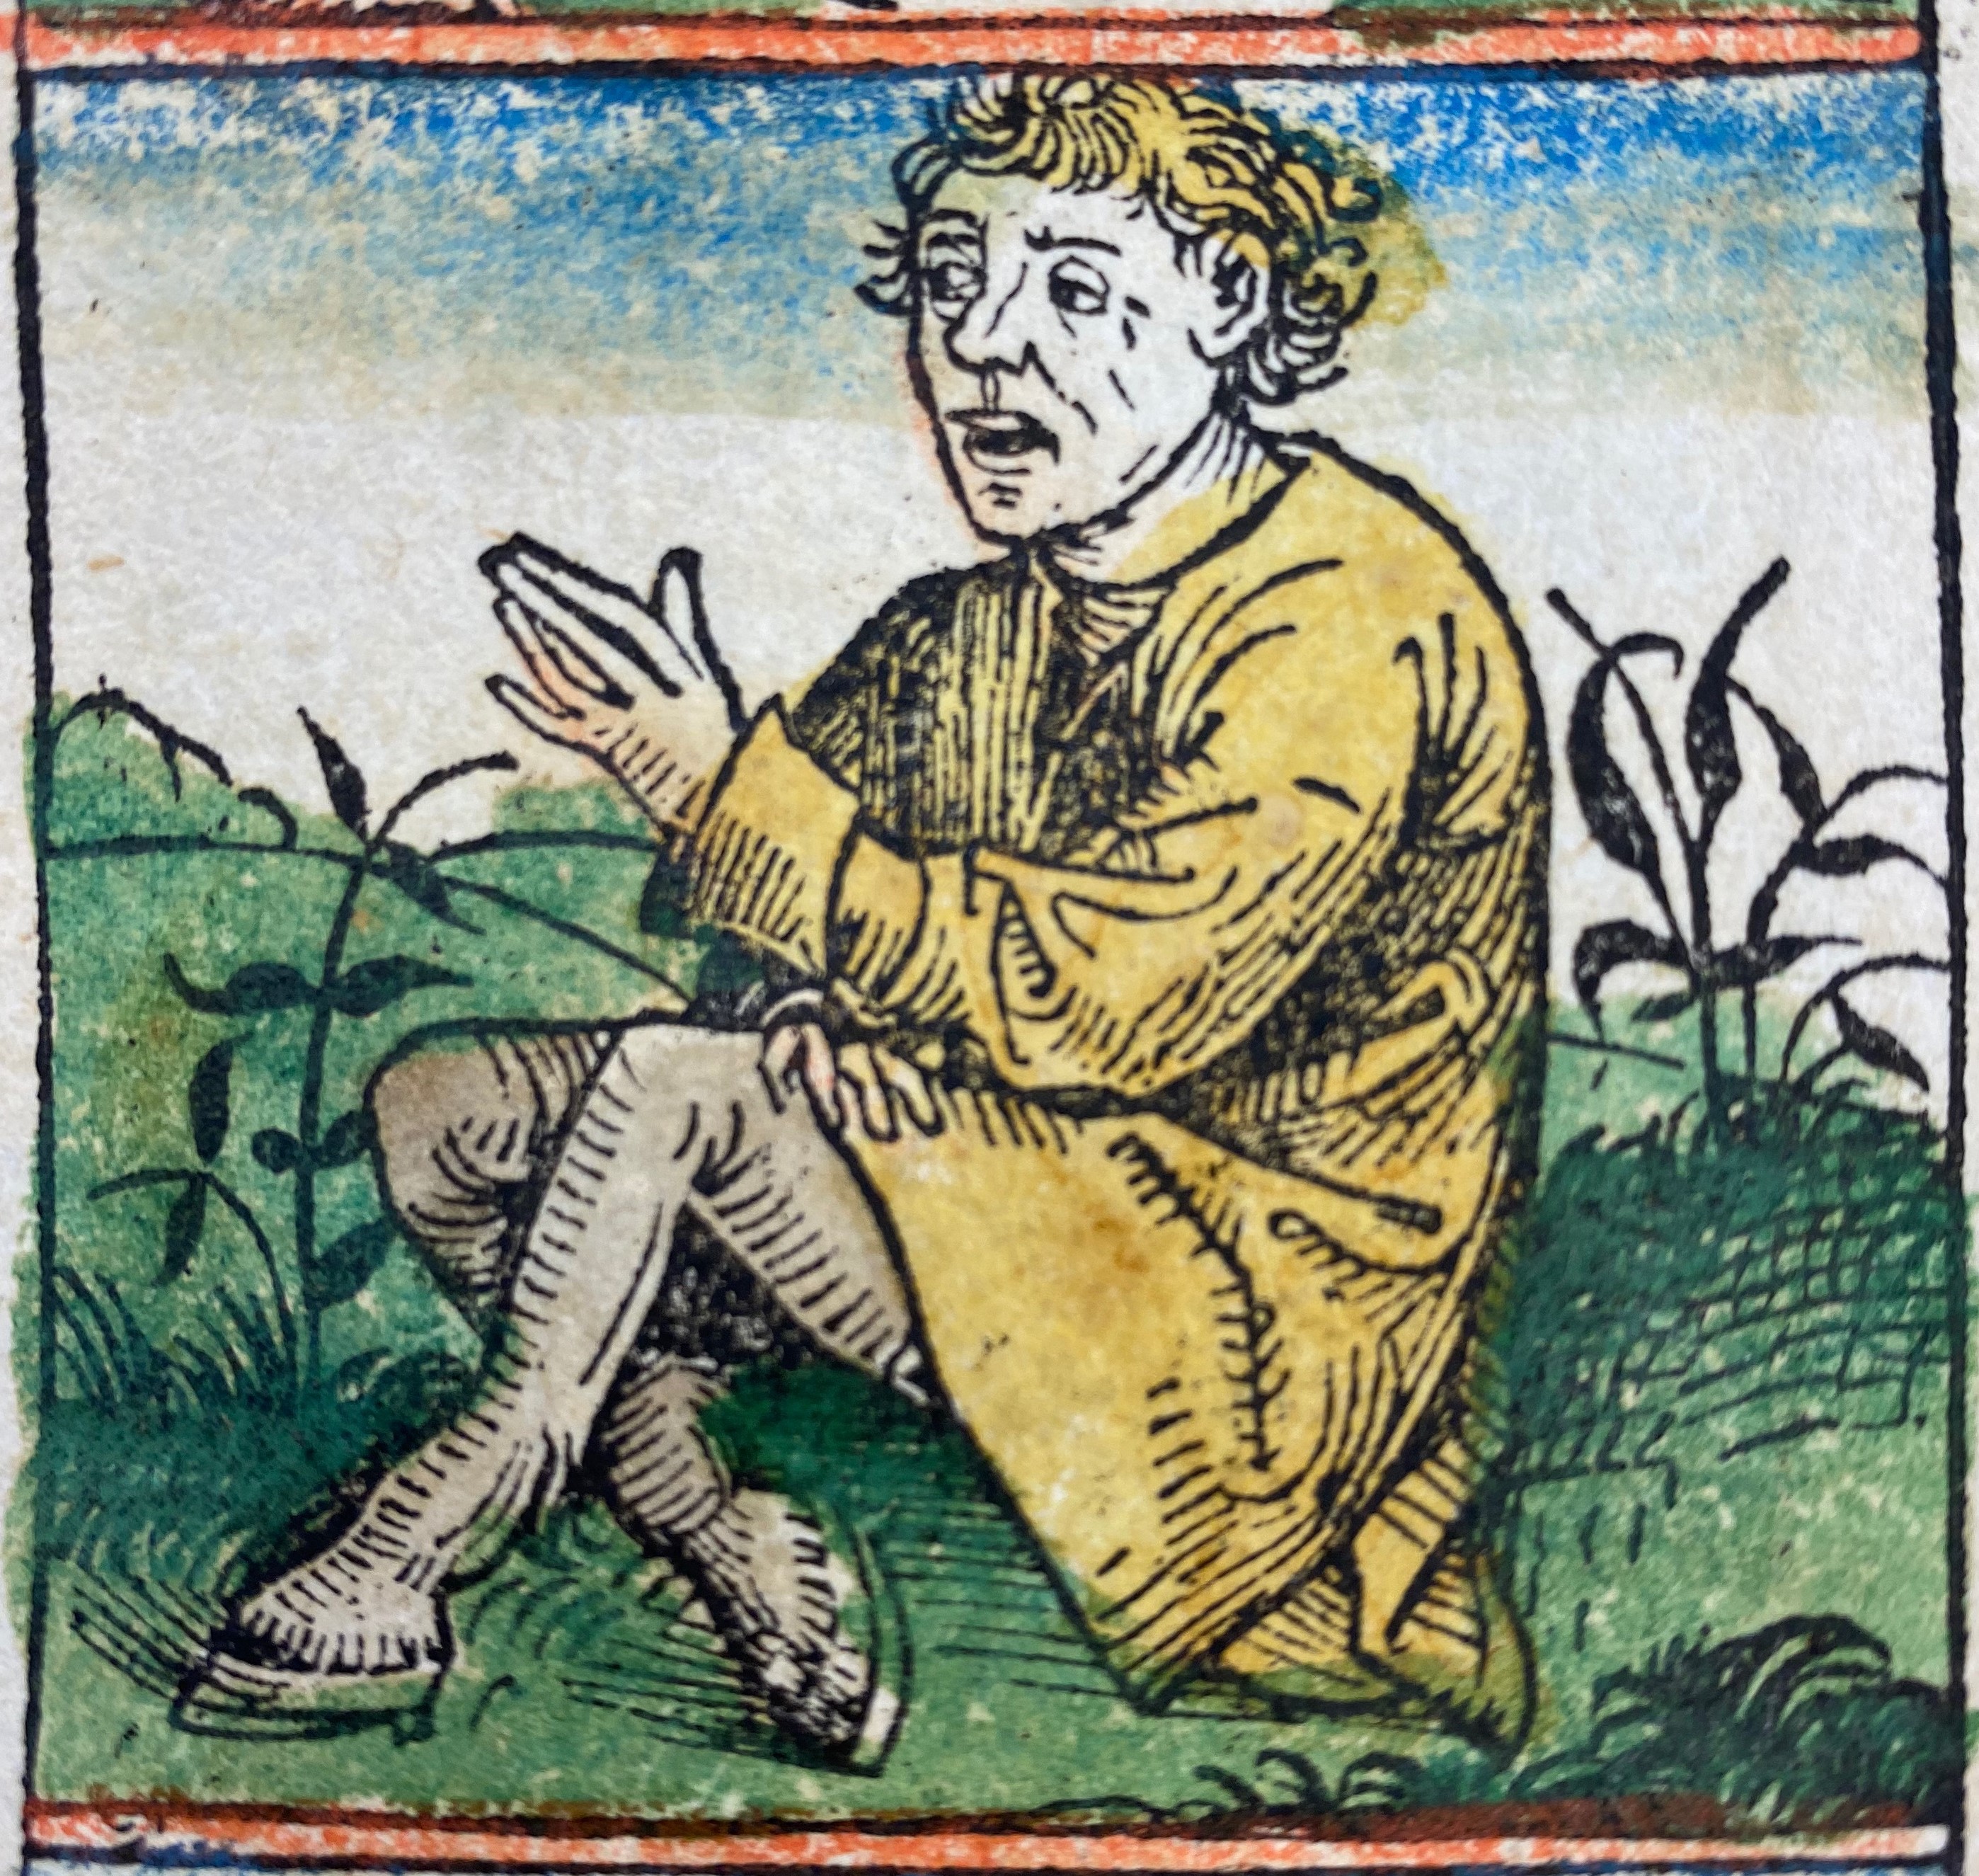 People's of the World Hoof, image from Nuremberg Chronicle